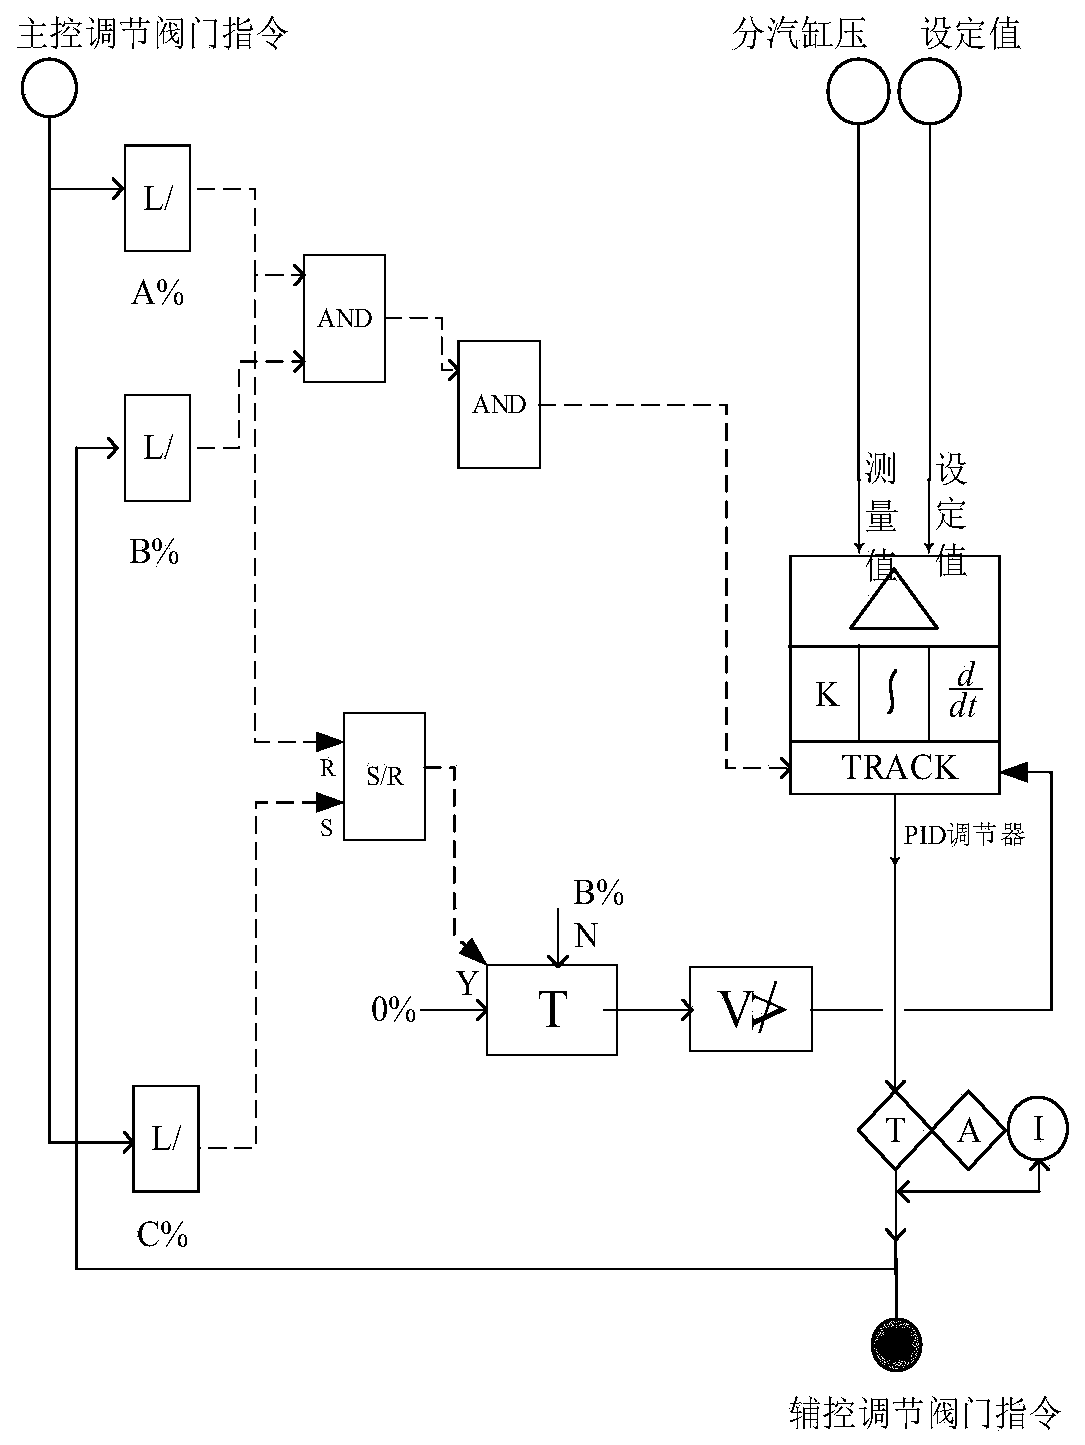 A steam supply pressure control method for thermal power plant heating network